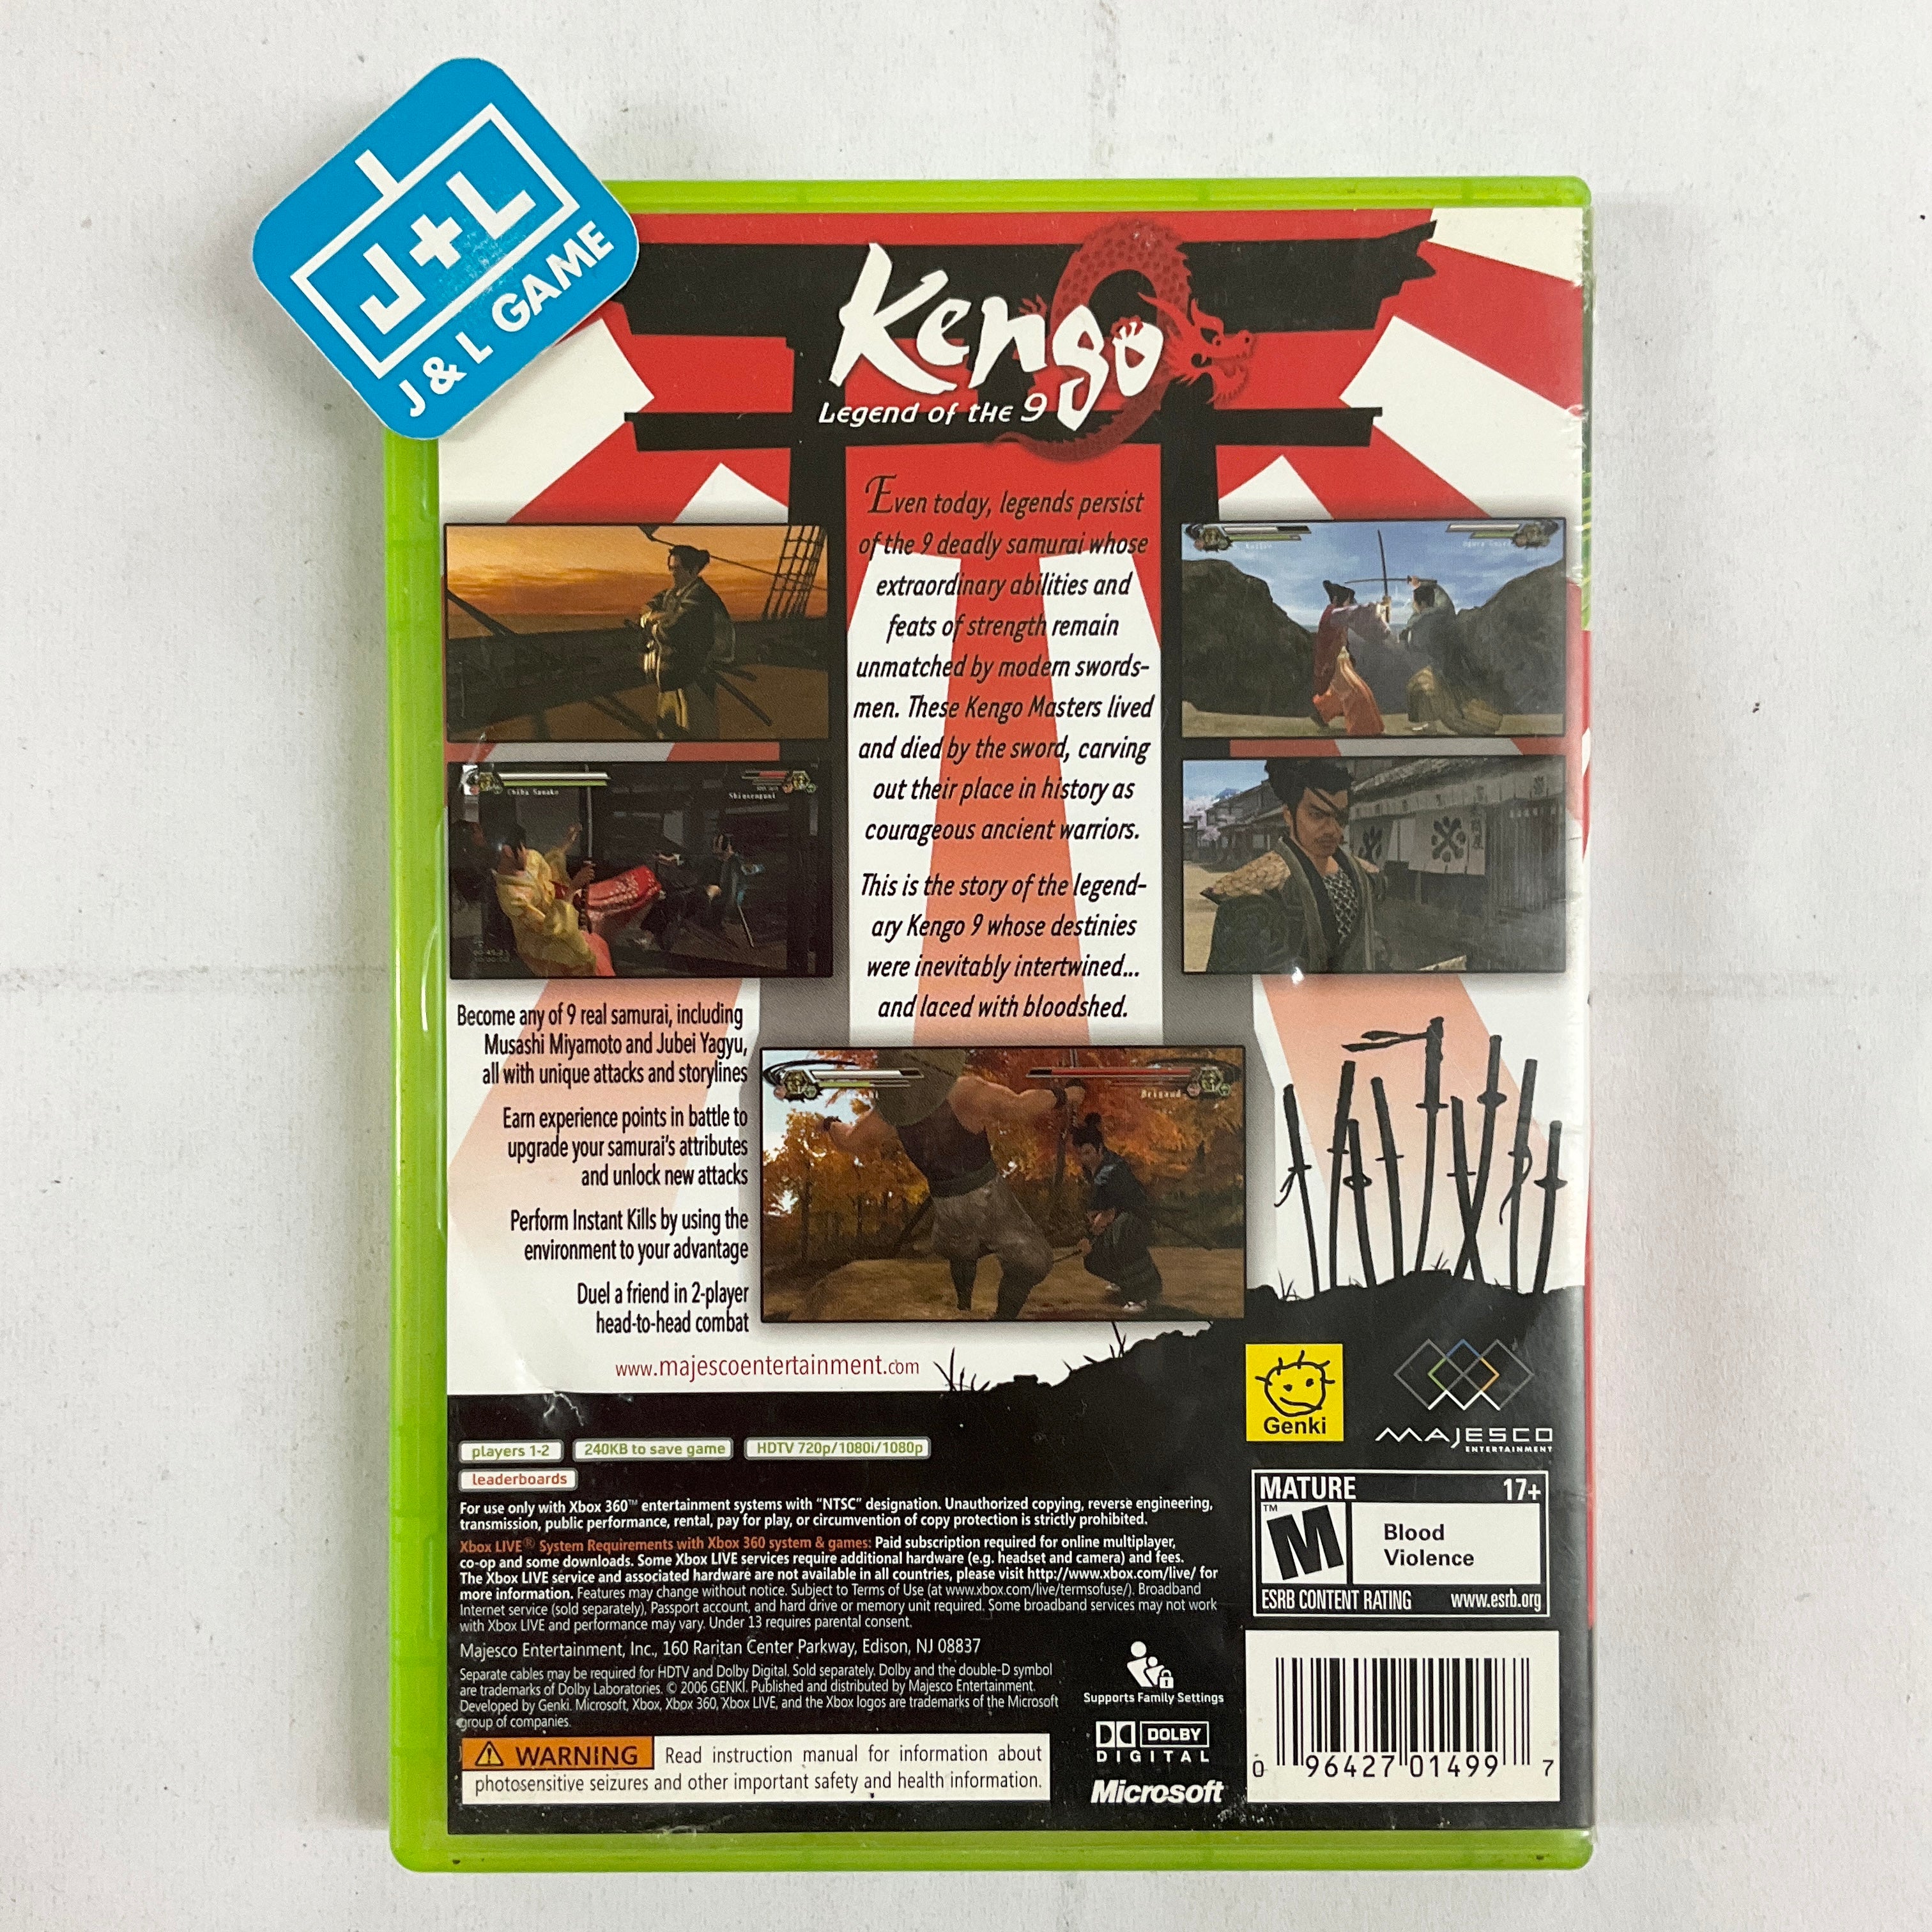 Kengo: Legend of the 9 - Xbox 360 [Pre-Owned] Video Games Majesco   